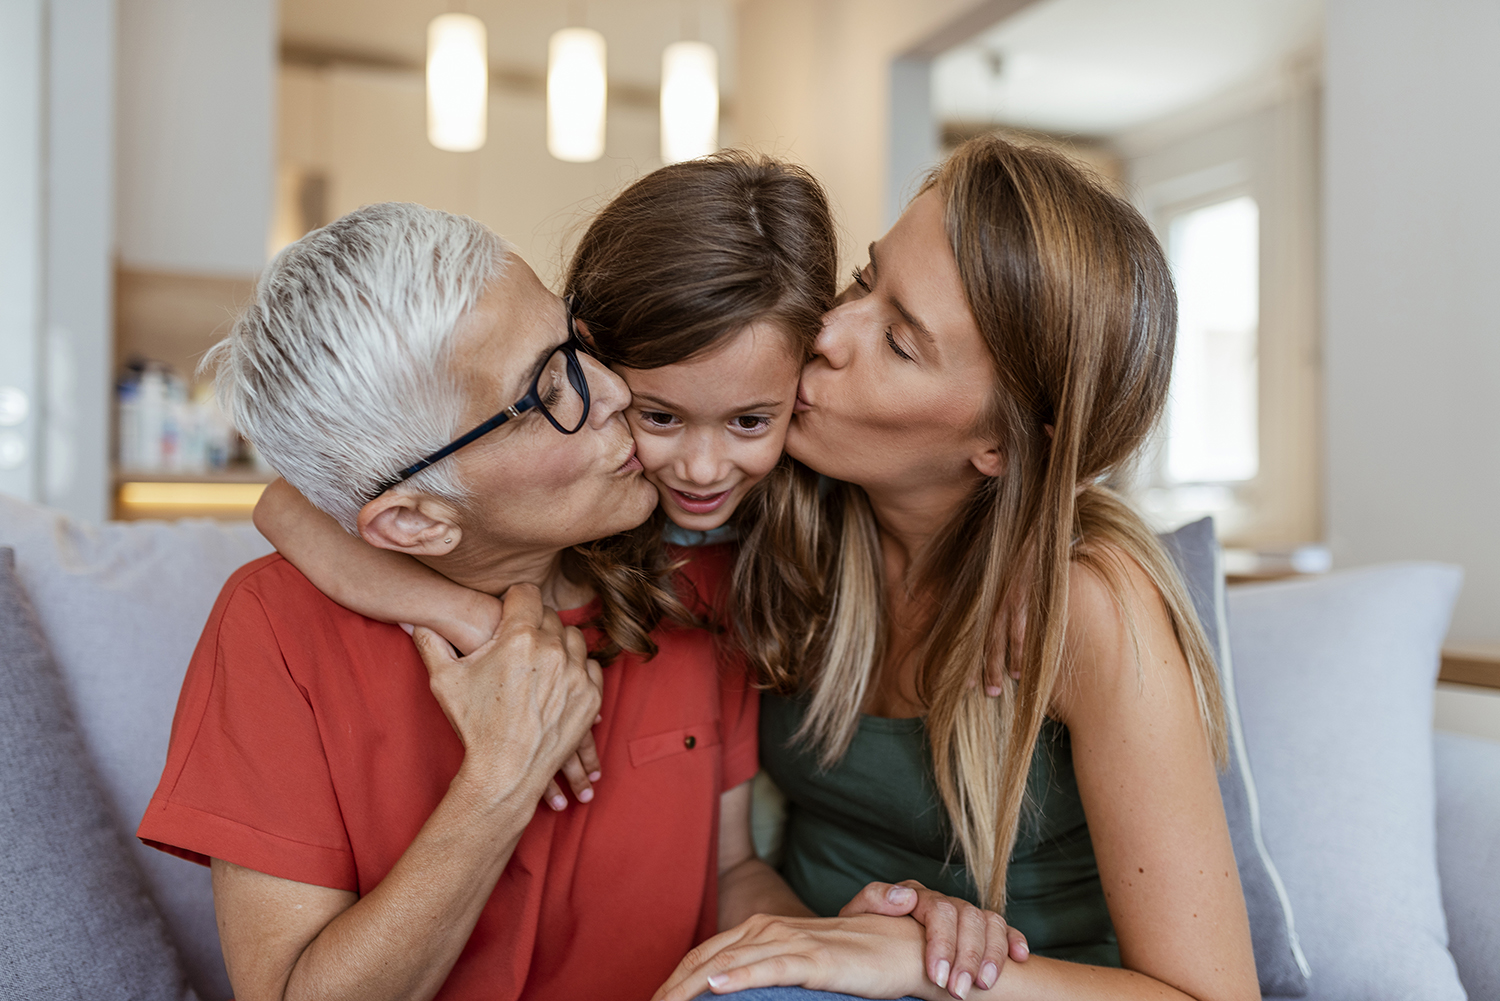 Older woman and younger woman kissing small child's cheeks